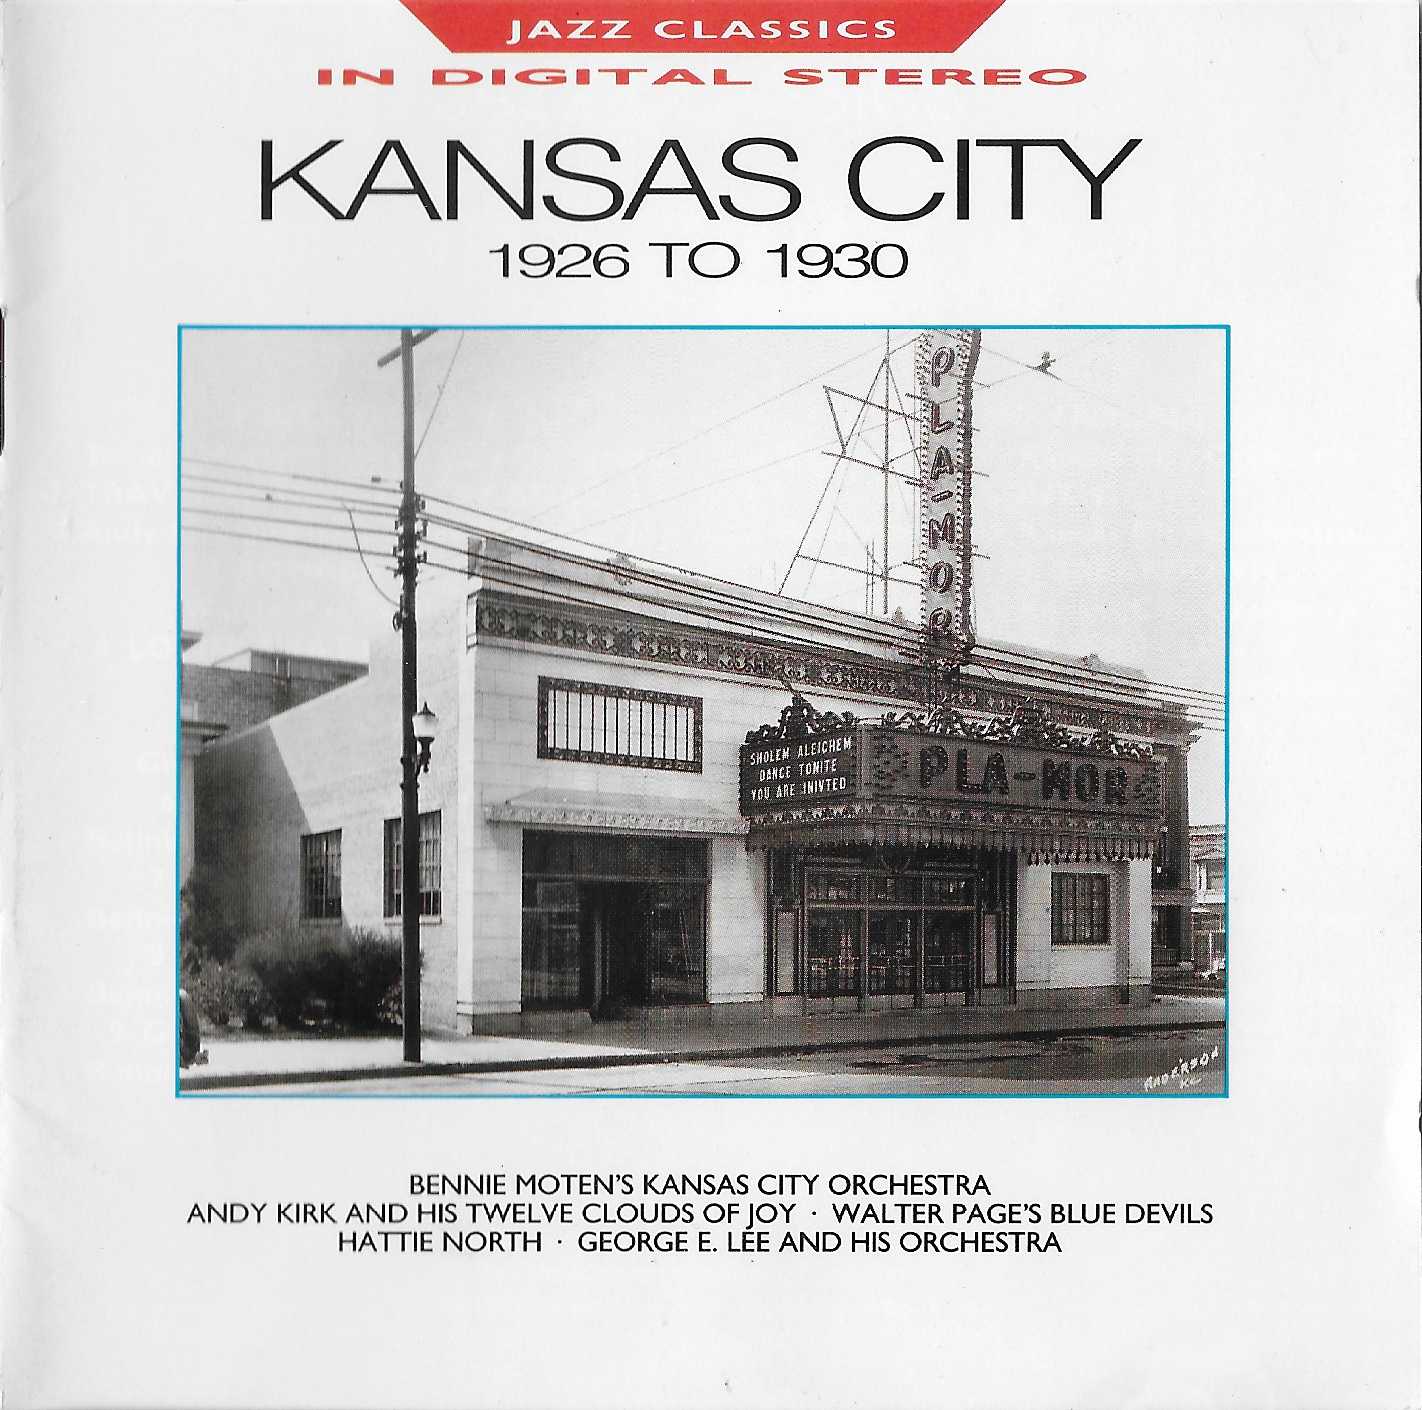 Picture of BBCCD691 Jazz classics - Kansas City 1926 - 1930 by artist Various from the BBC cds - Records and Tapes library